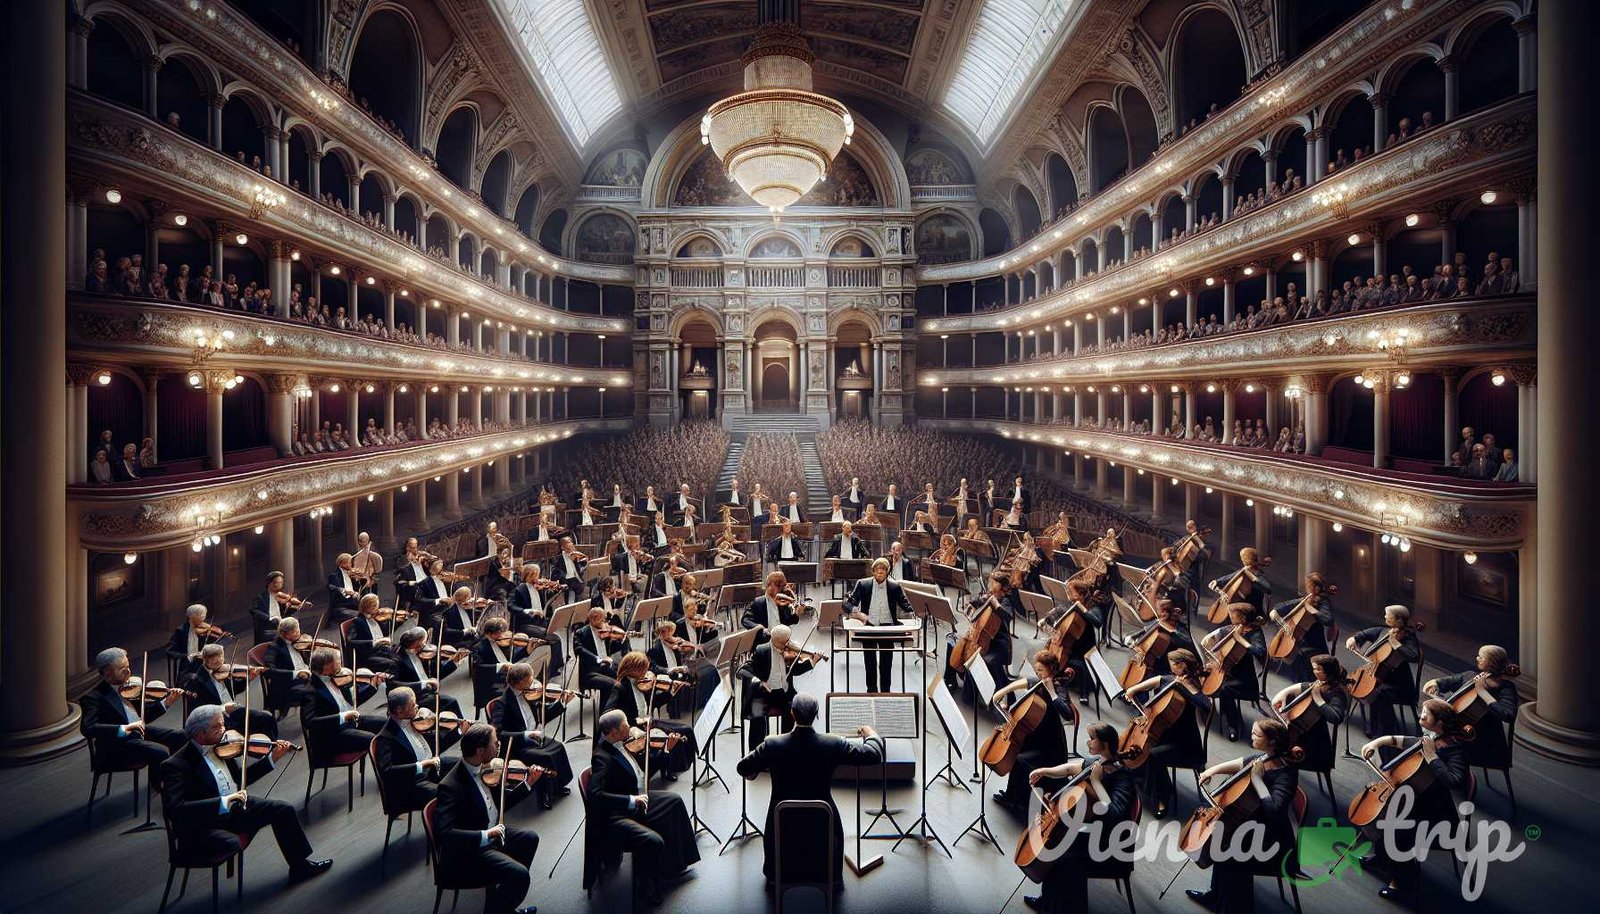 Illustration for section: 1. Vienna Philharmonic Orchestra: Founded in 1842, the Vienna Philharmonic Orchestra is one of the p - vienna melodies